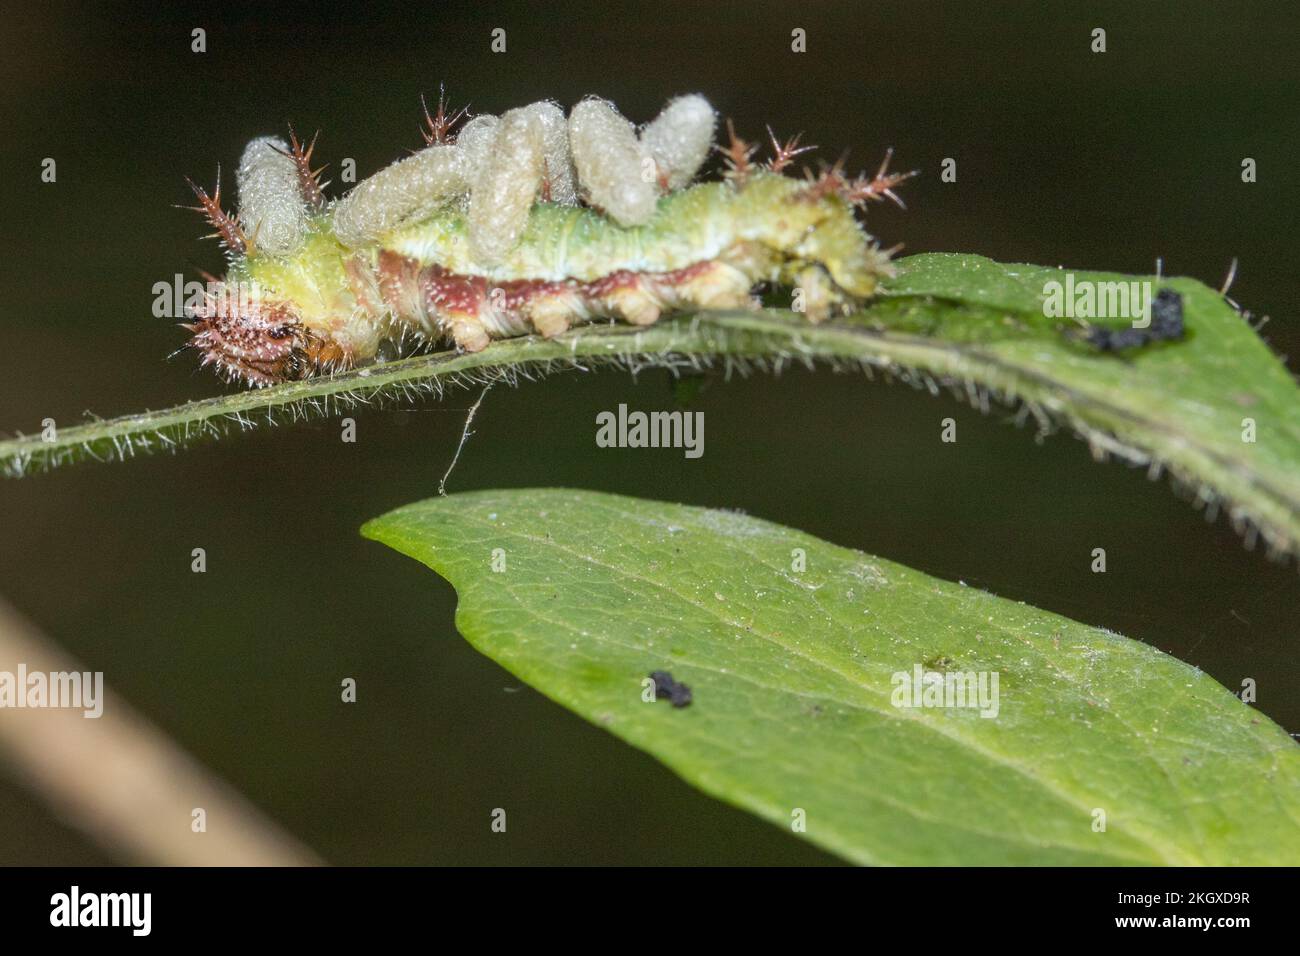 Parasitised White Admiral (Limenitis camilla) caterpillar with cocoons of wasp larvae recently emerged from its body. Sussex, UK. Stock Photo